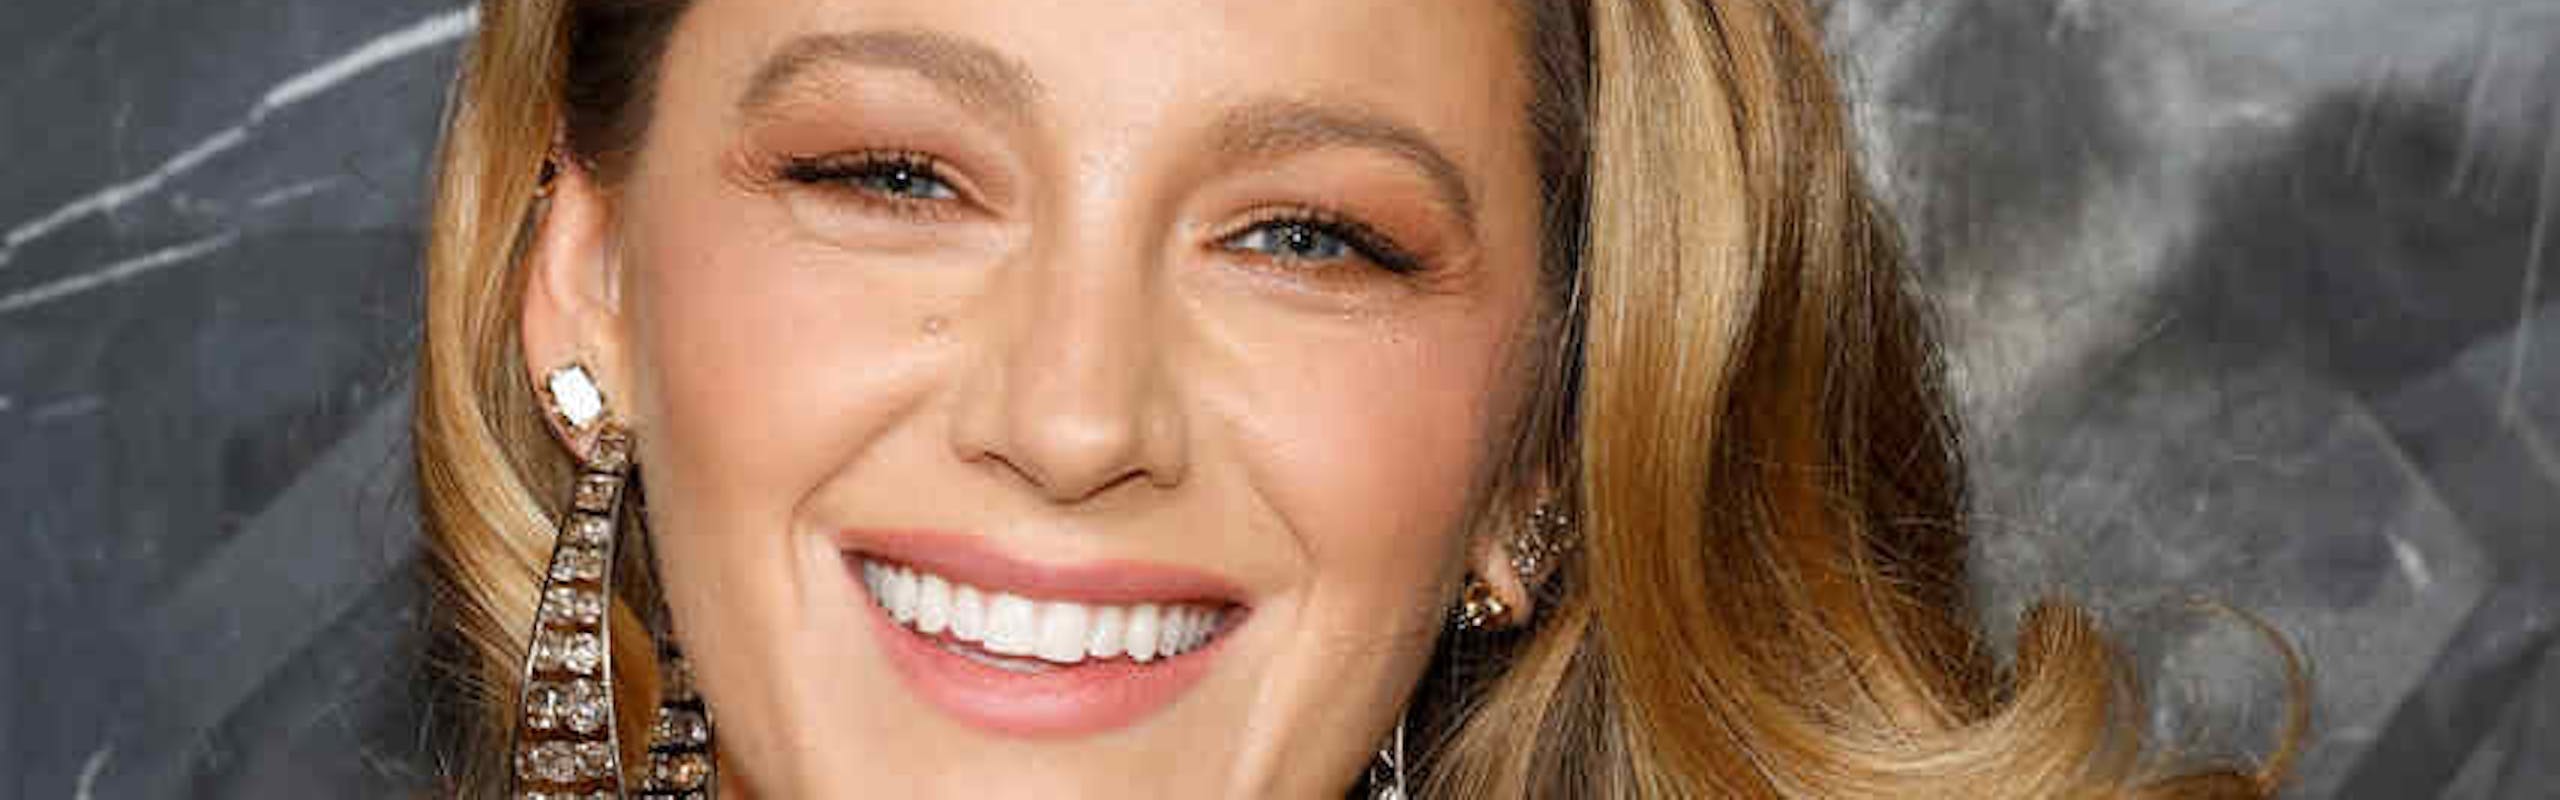 Blake Lively - Foto: Getty Images